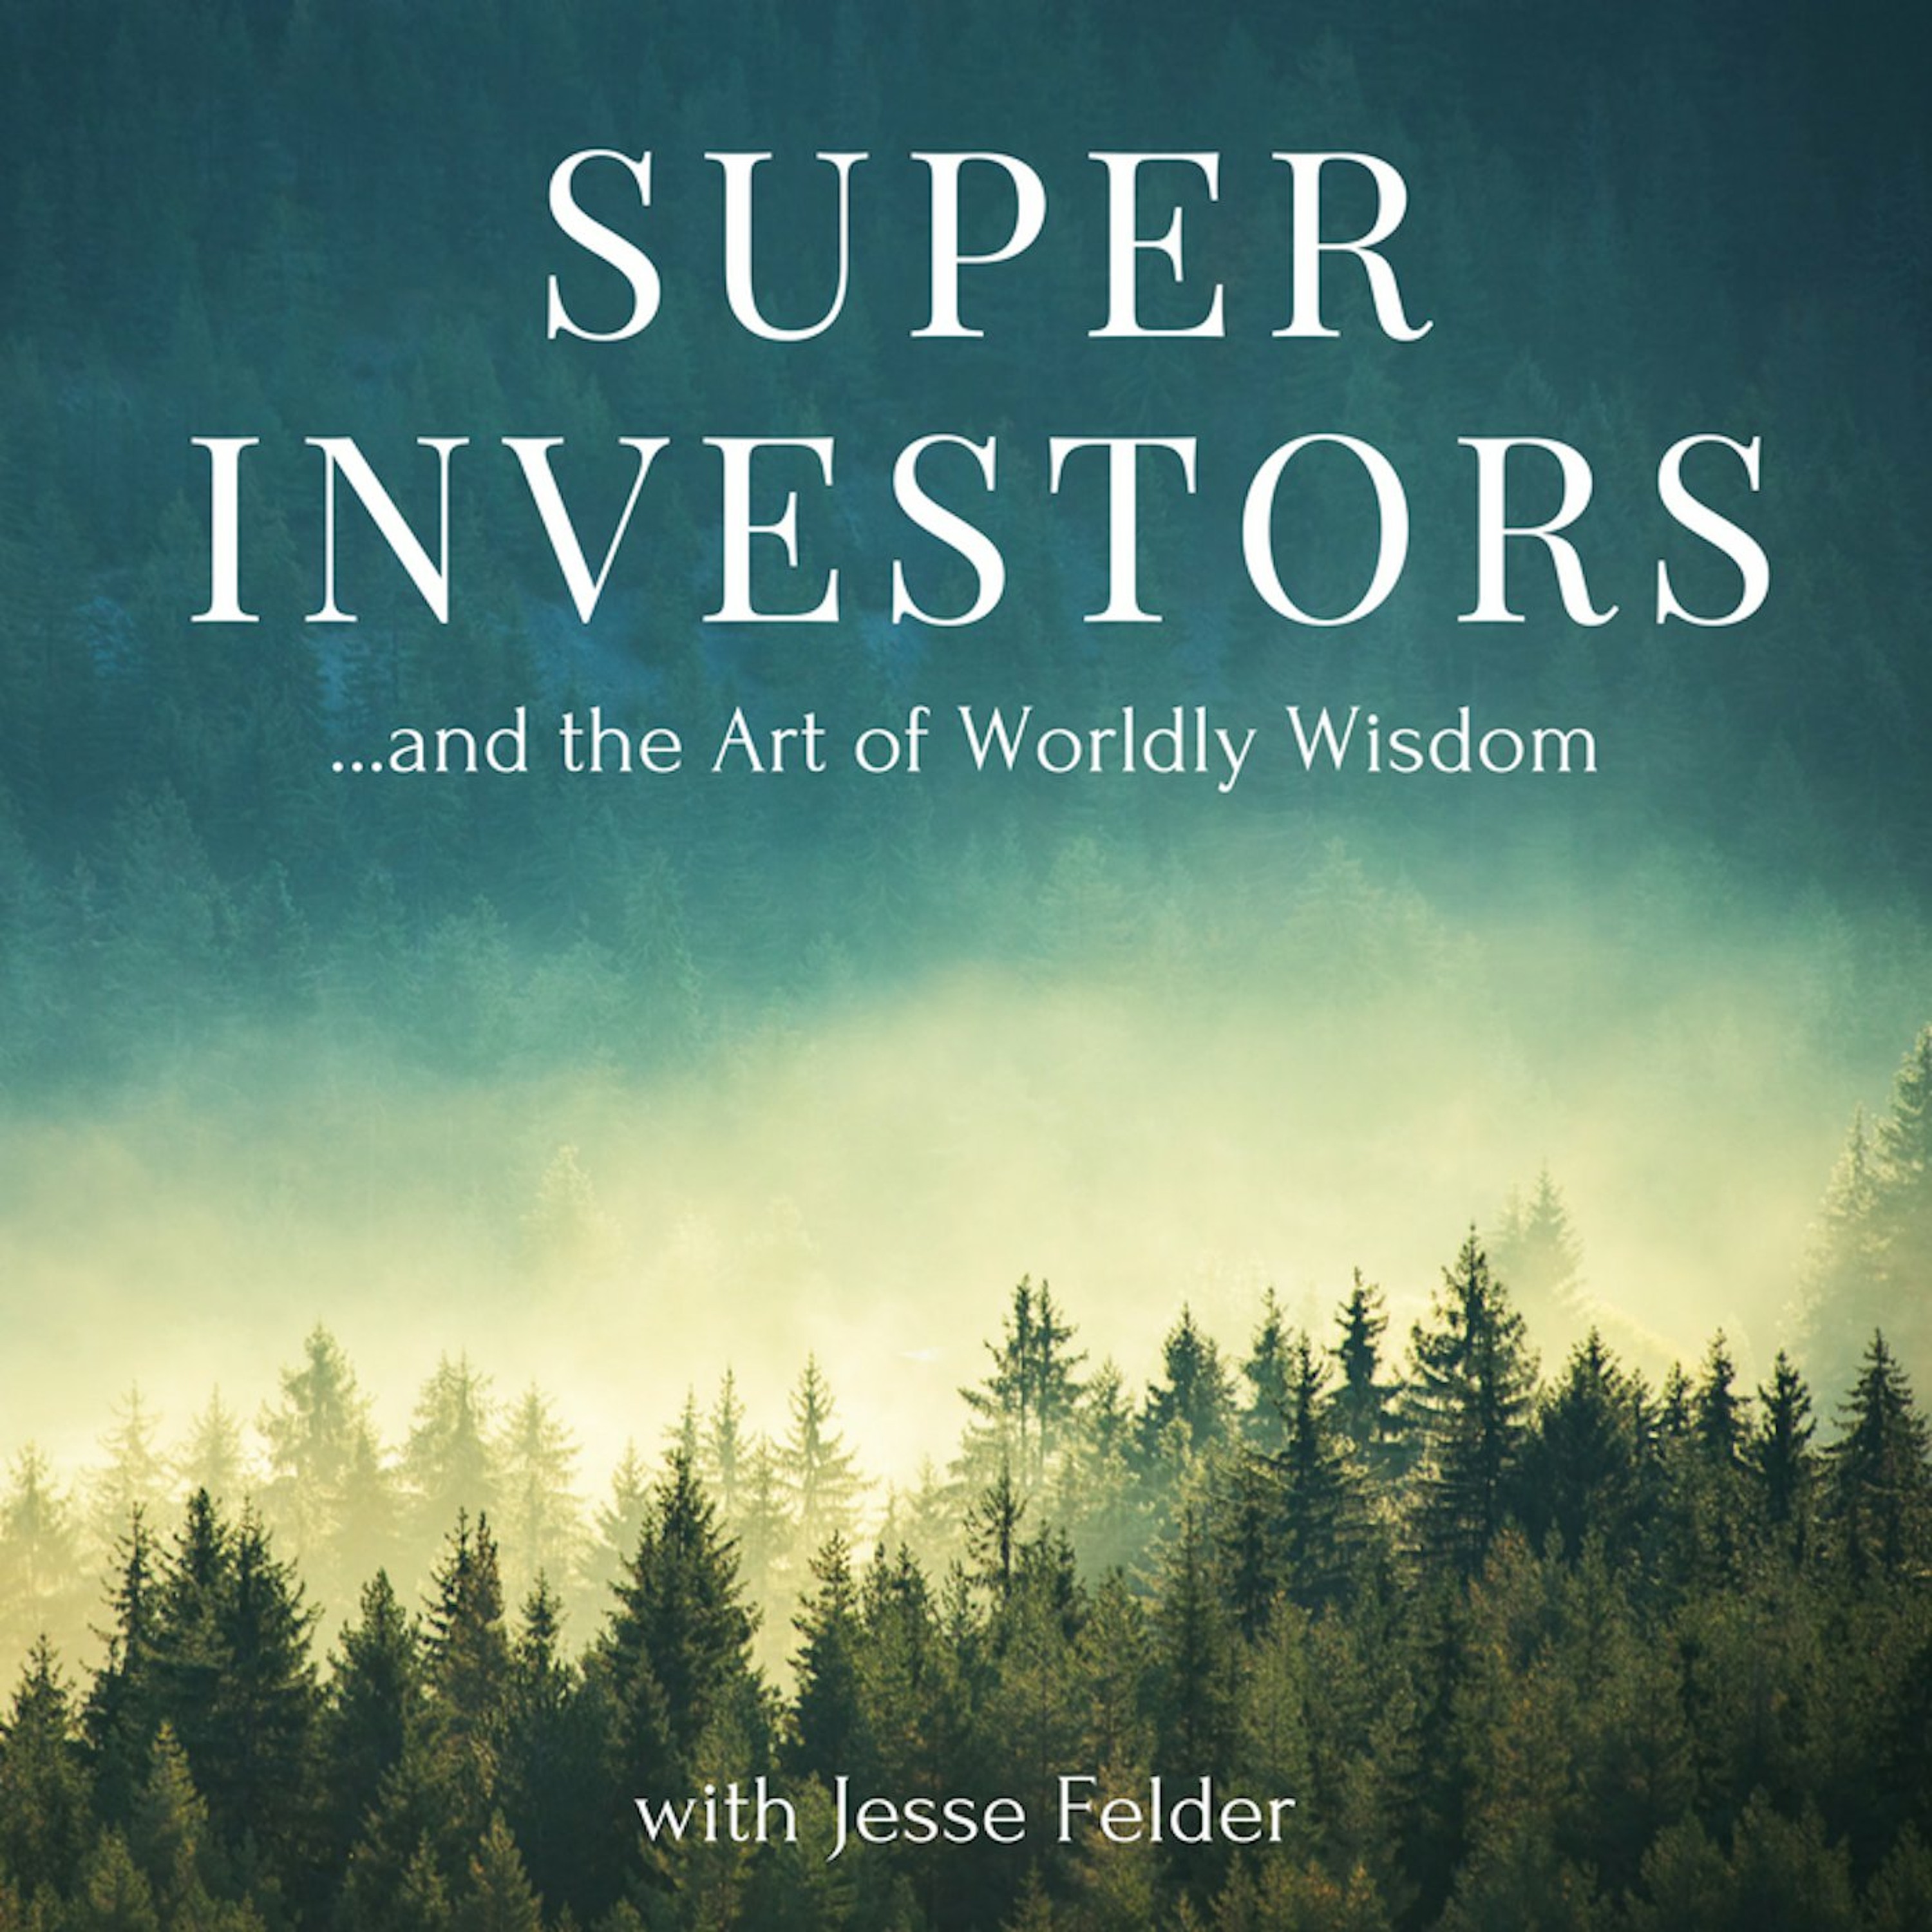 #53: Edward Chancellor On What History Can Teach Us About The True Cost Of Easy Money